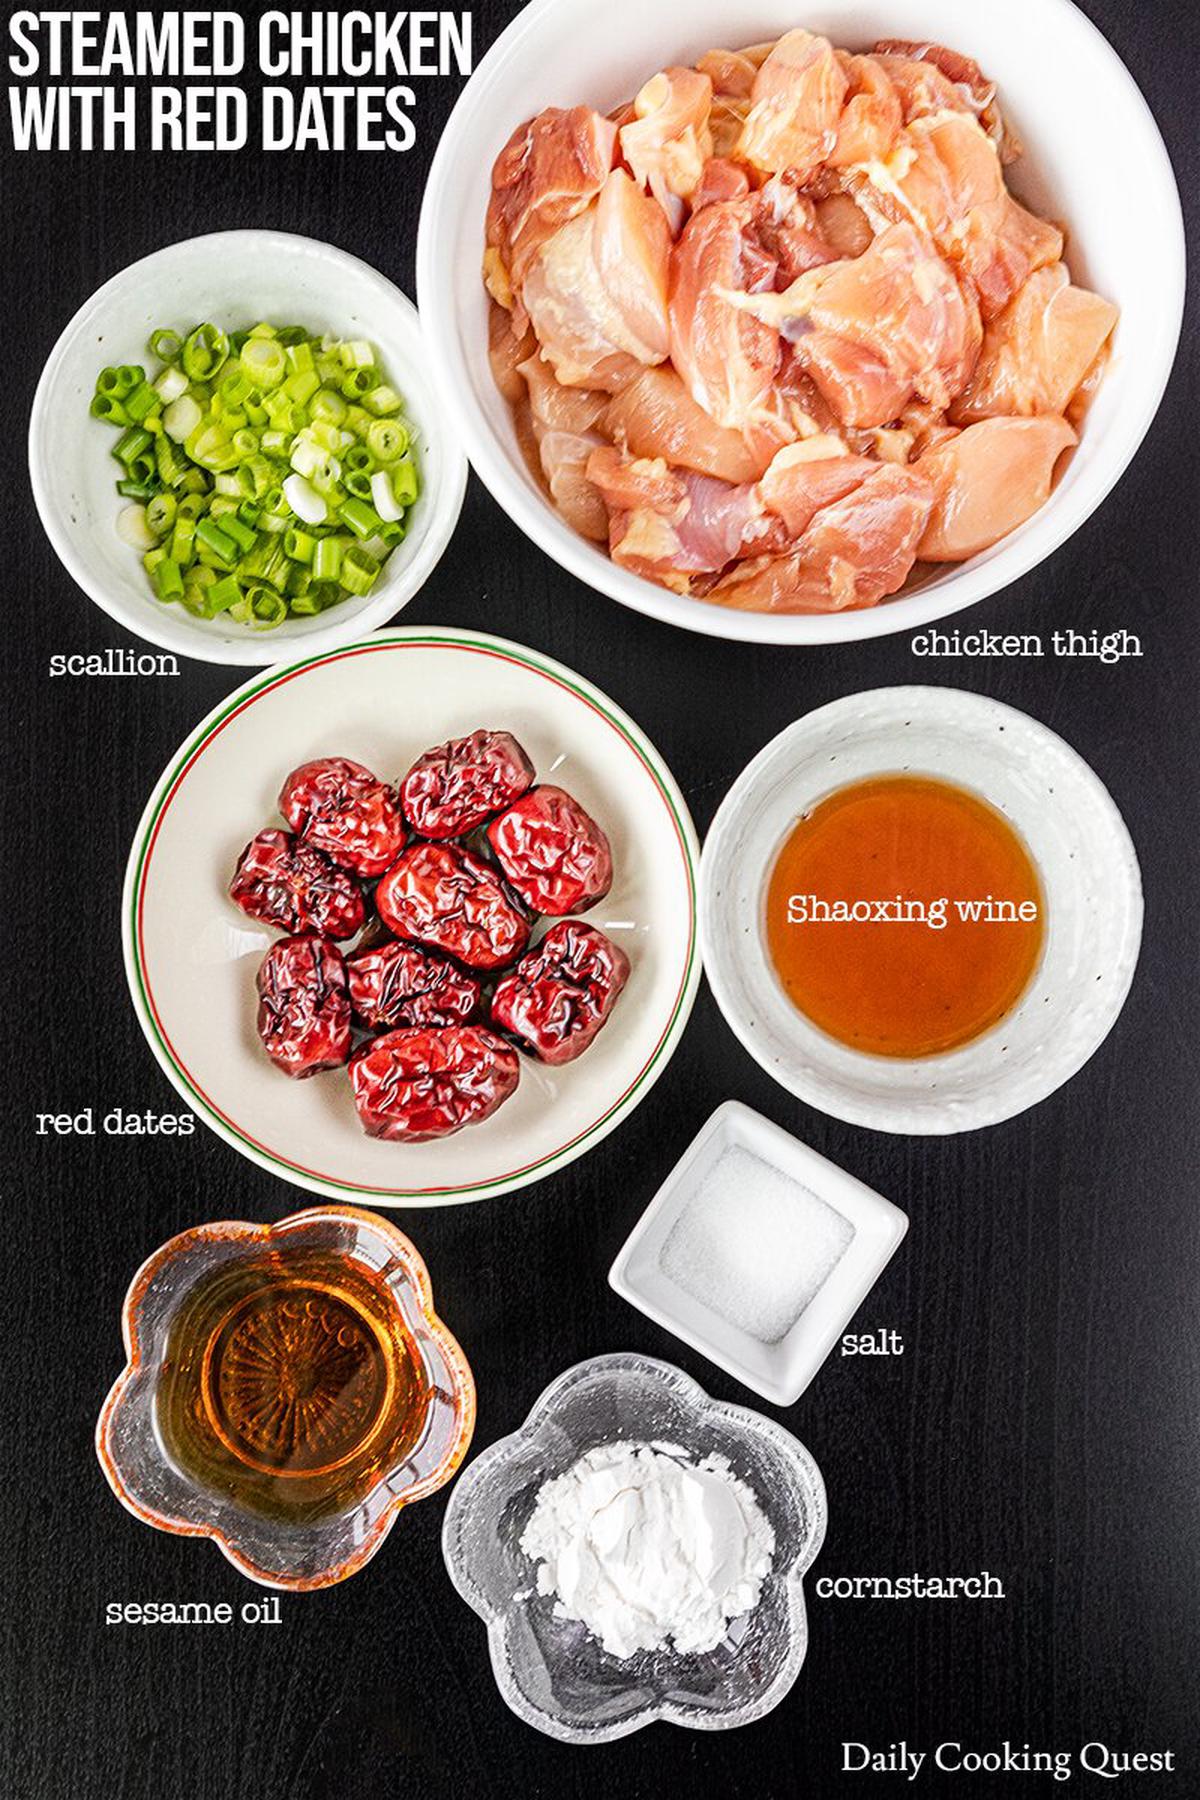 Ingredients to Prepare Steamed Chicken with Red Dates.